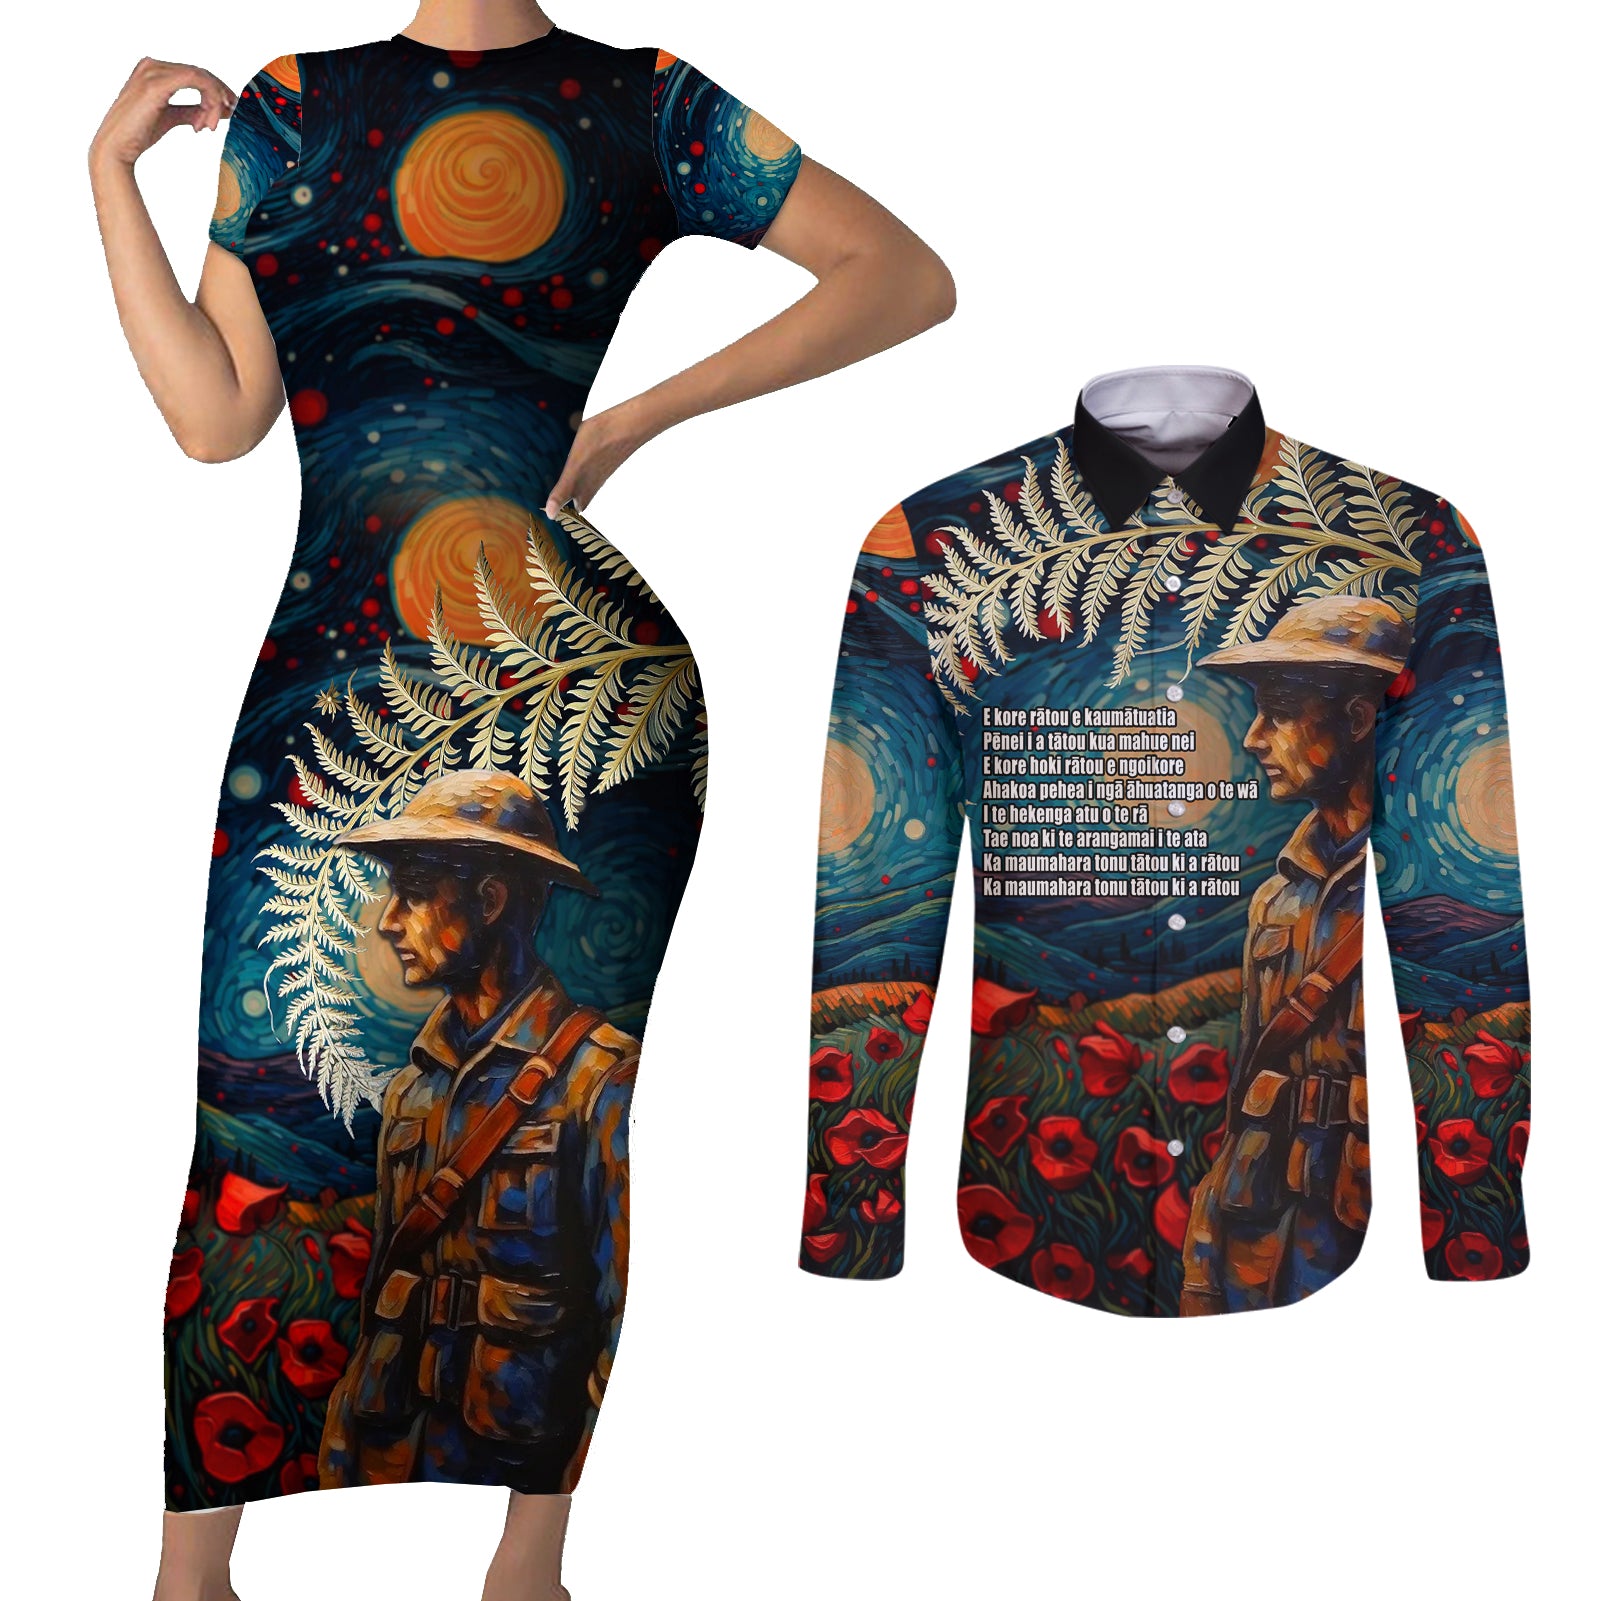 New Zealand Soldier ANZAC Day Couples Matching Short Sleeve Bodycon Dress and Long Sleeve Button Shirt Silver Fern Starry Night Style LT03 Blue - Polynesian Pride